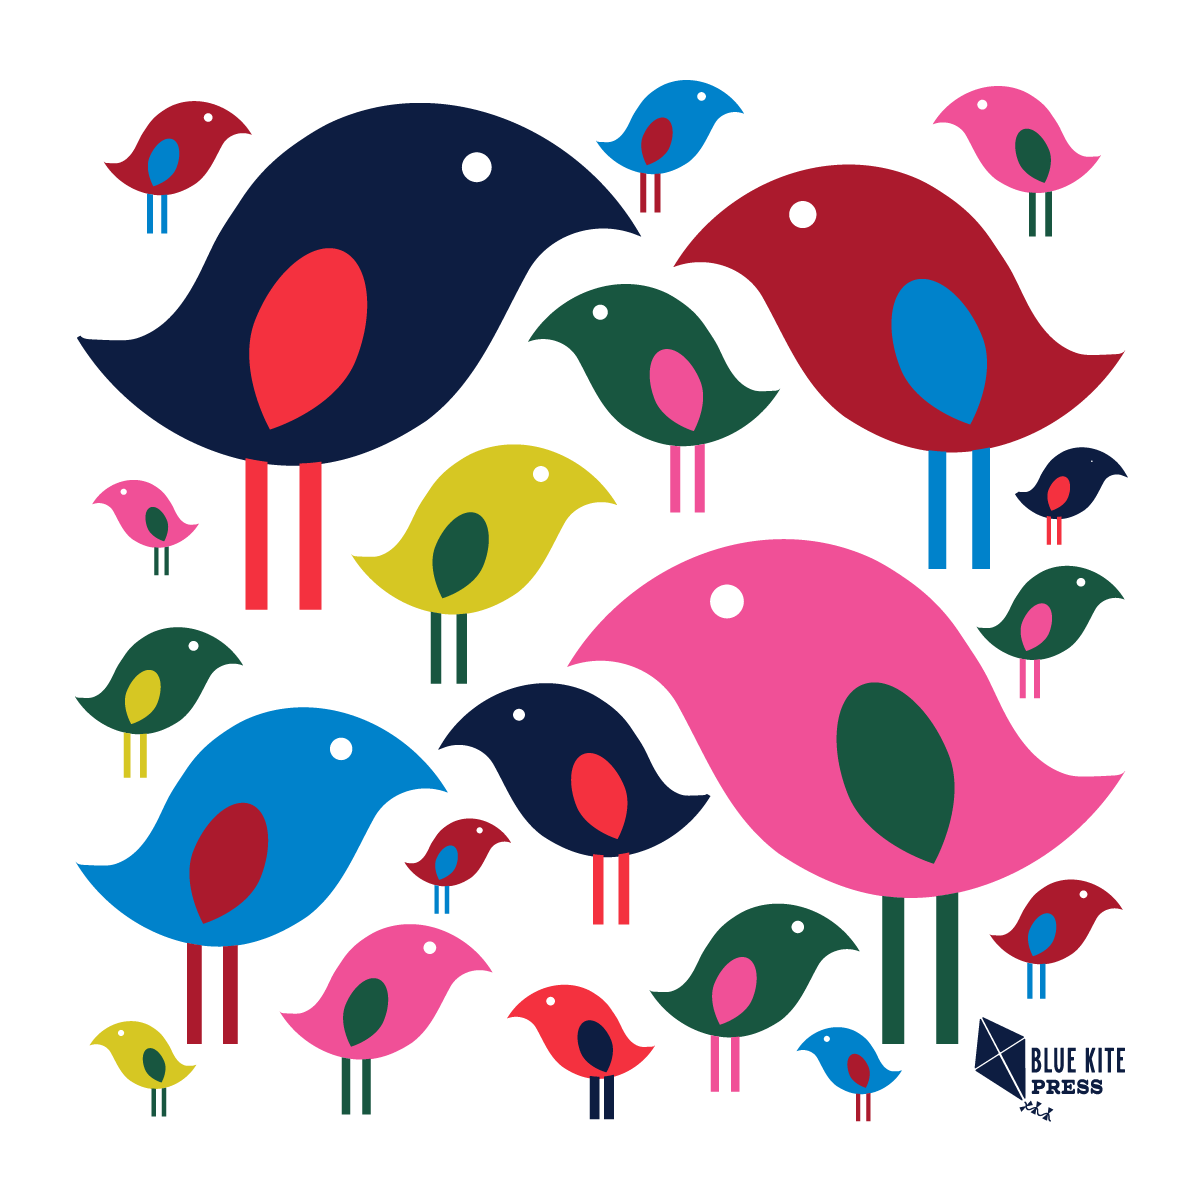 Bright Bird collection from Blue Kite Press. Modern, joyful illustration of colorful birds in different sizes.